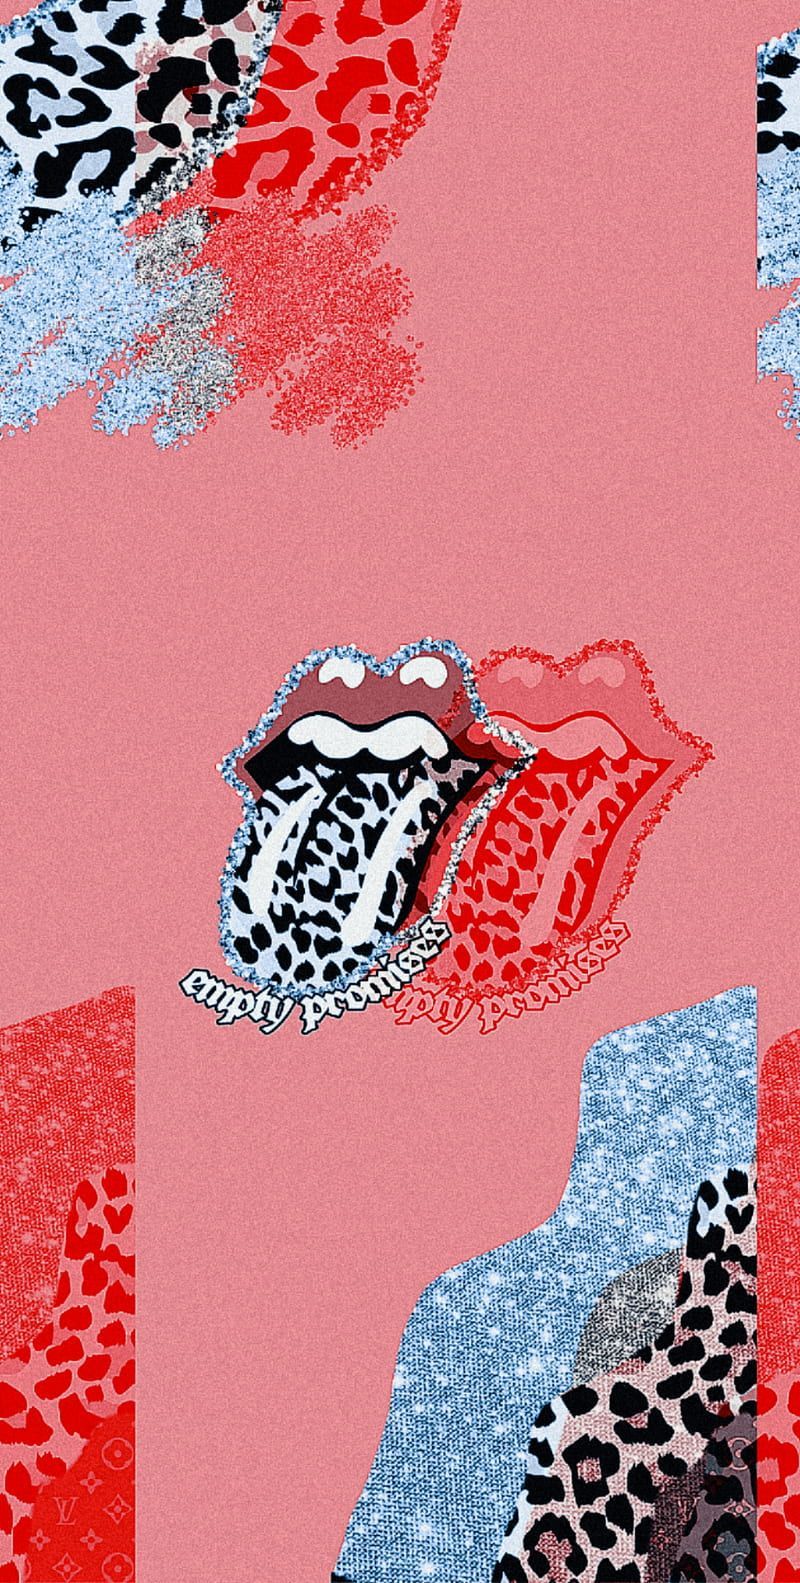 A colorful and swirling artwork covers a poster, featuring a pair of lips in the center and various leopard patterns and spots throughout the background. The lips appear in different sizes, ranging from smaller to larger. The leopard patterns appear all over the poster, creating a unique and dynamic visual style. The  - Rolling Stones